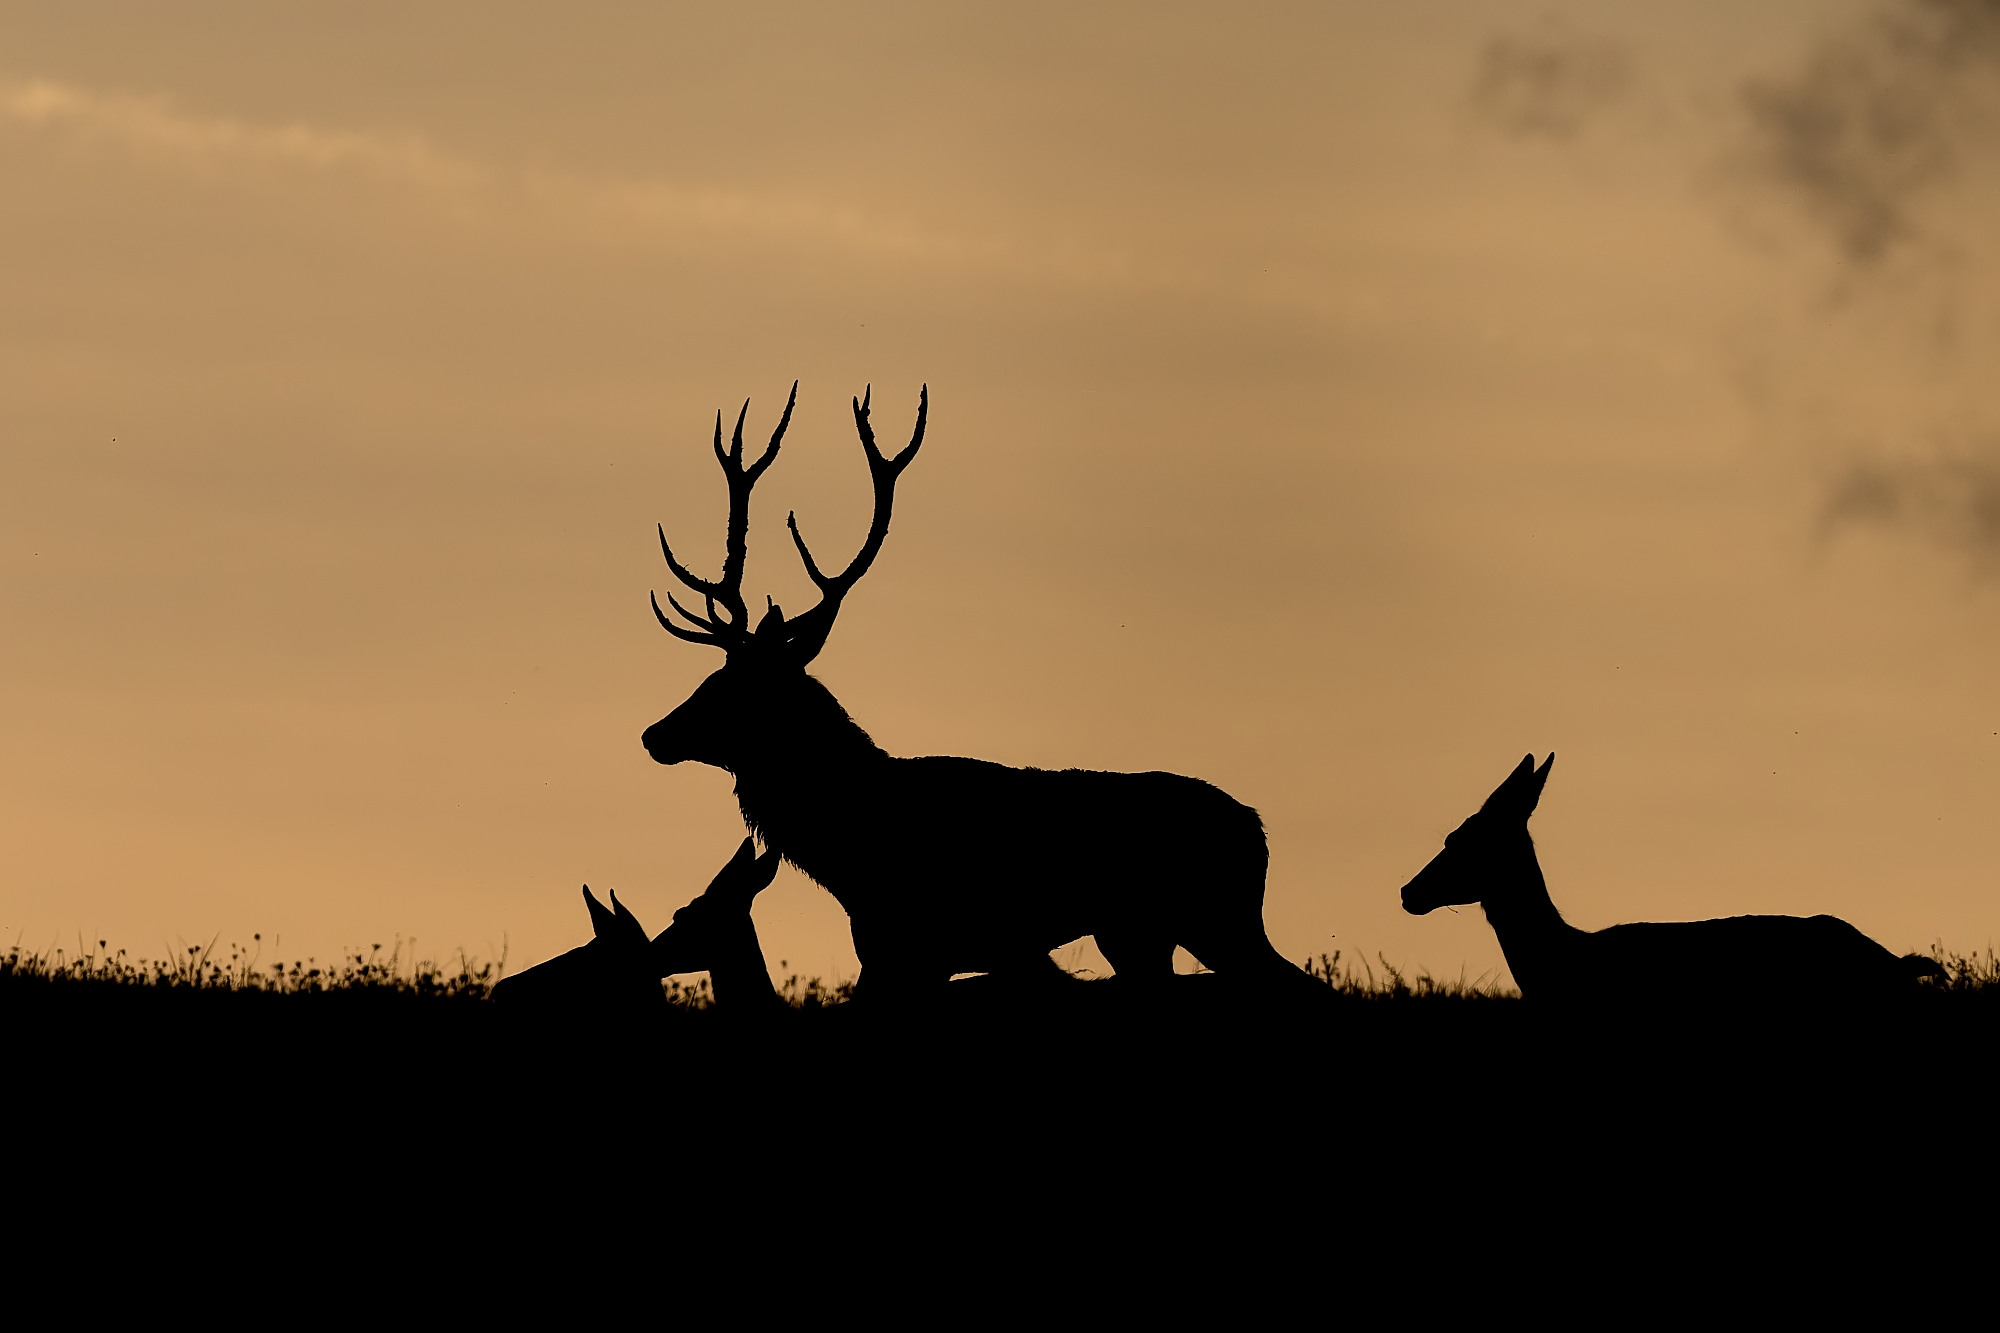 General 2000x1333 nature animals deer silhouette outdoors baby animals antlers